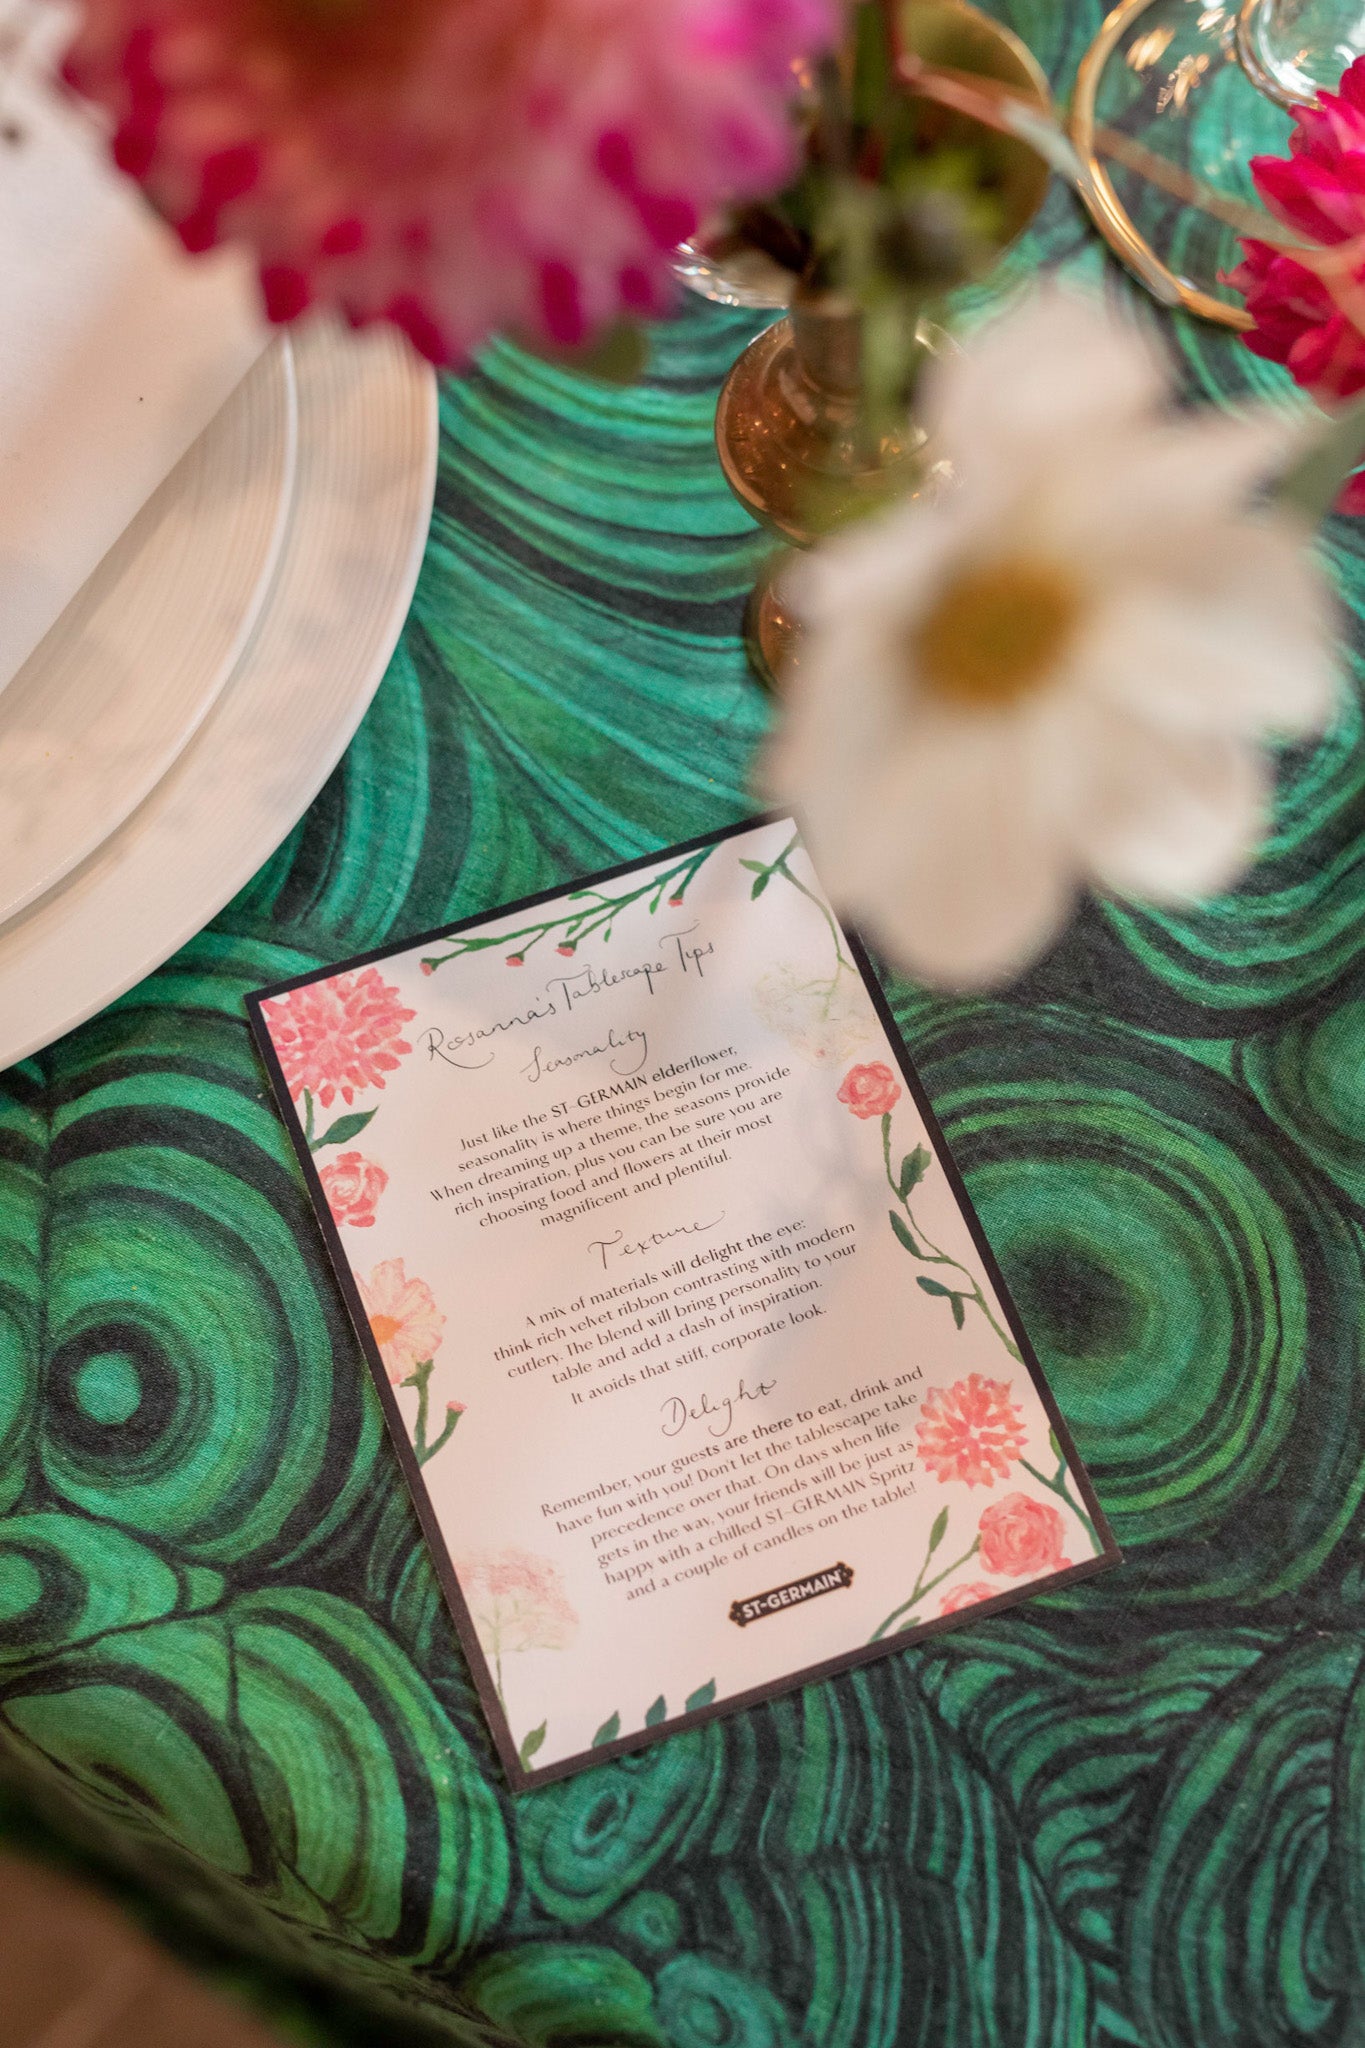 Tablescape tips on table by Rosanna Falconer